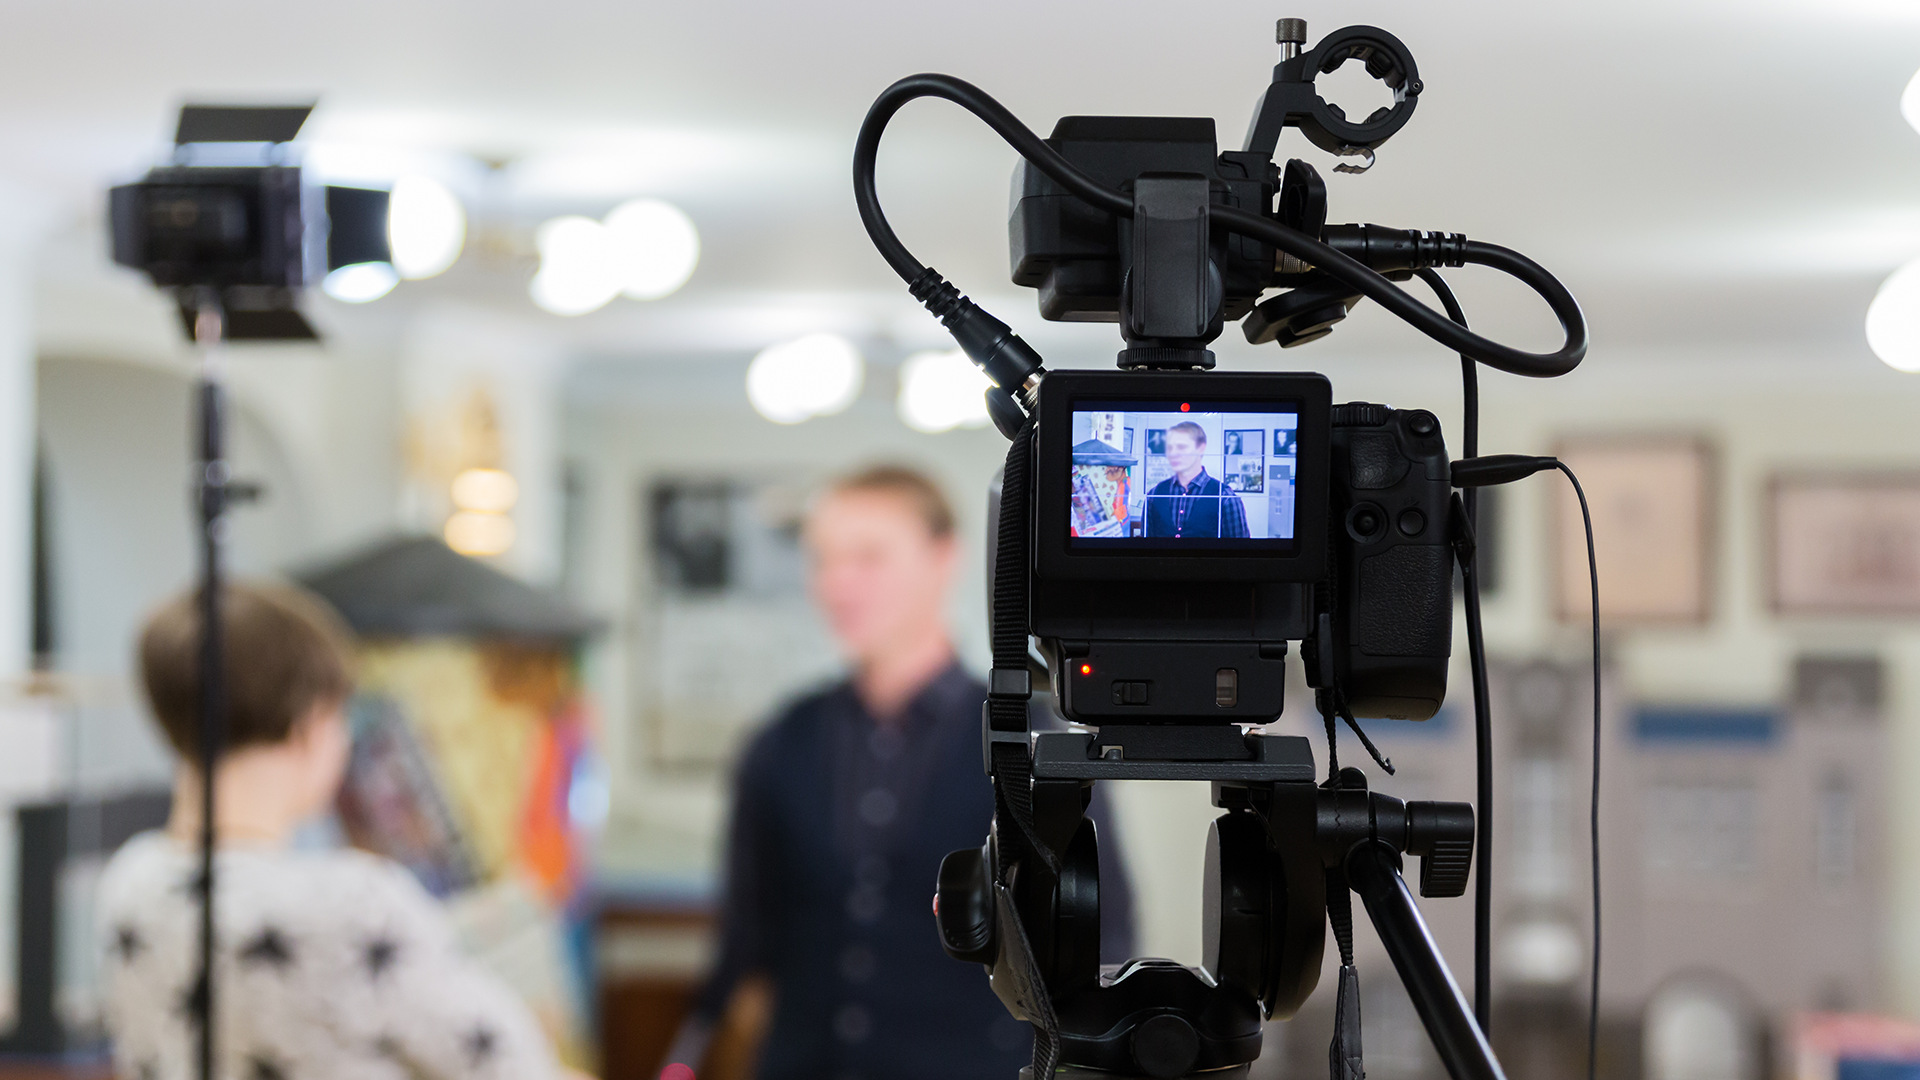 Video marketing is the latest and greatest way to make an impression.